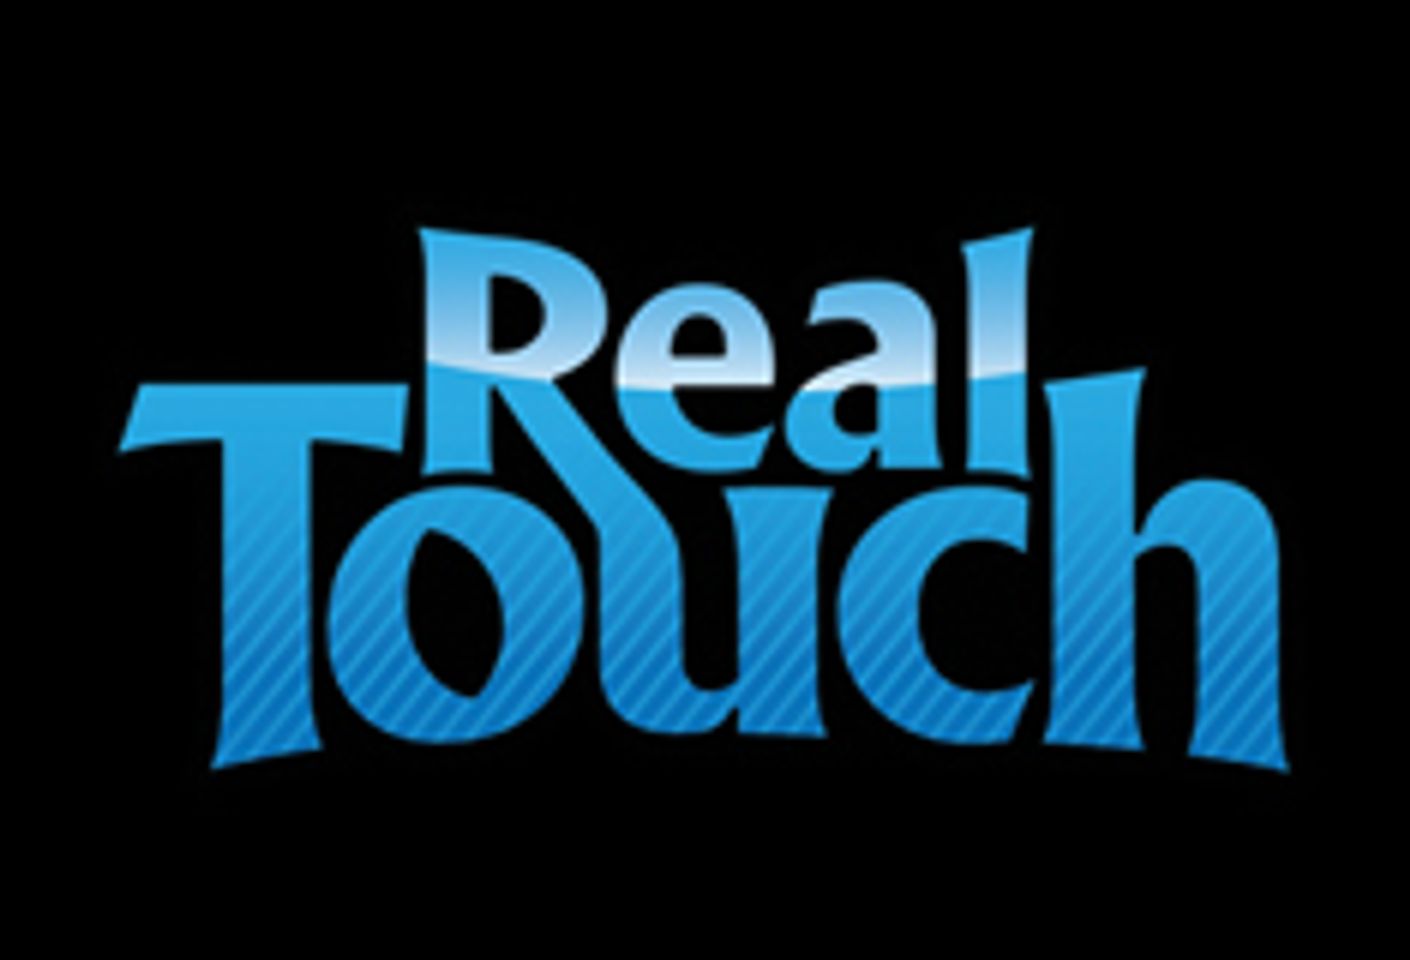 AEBN to Demo RealTouch at AEE